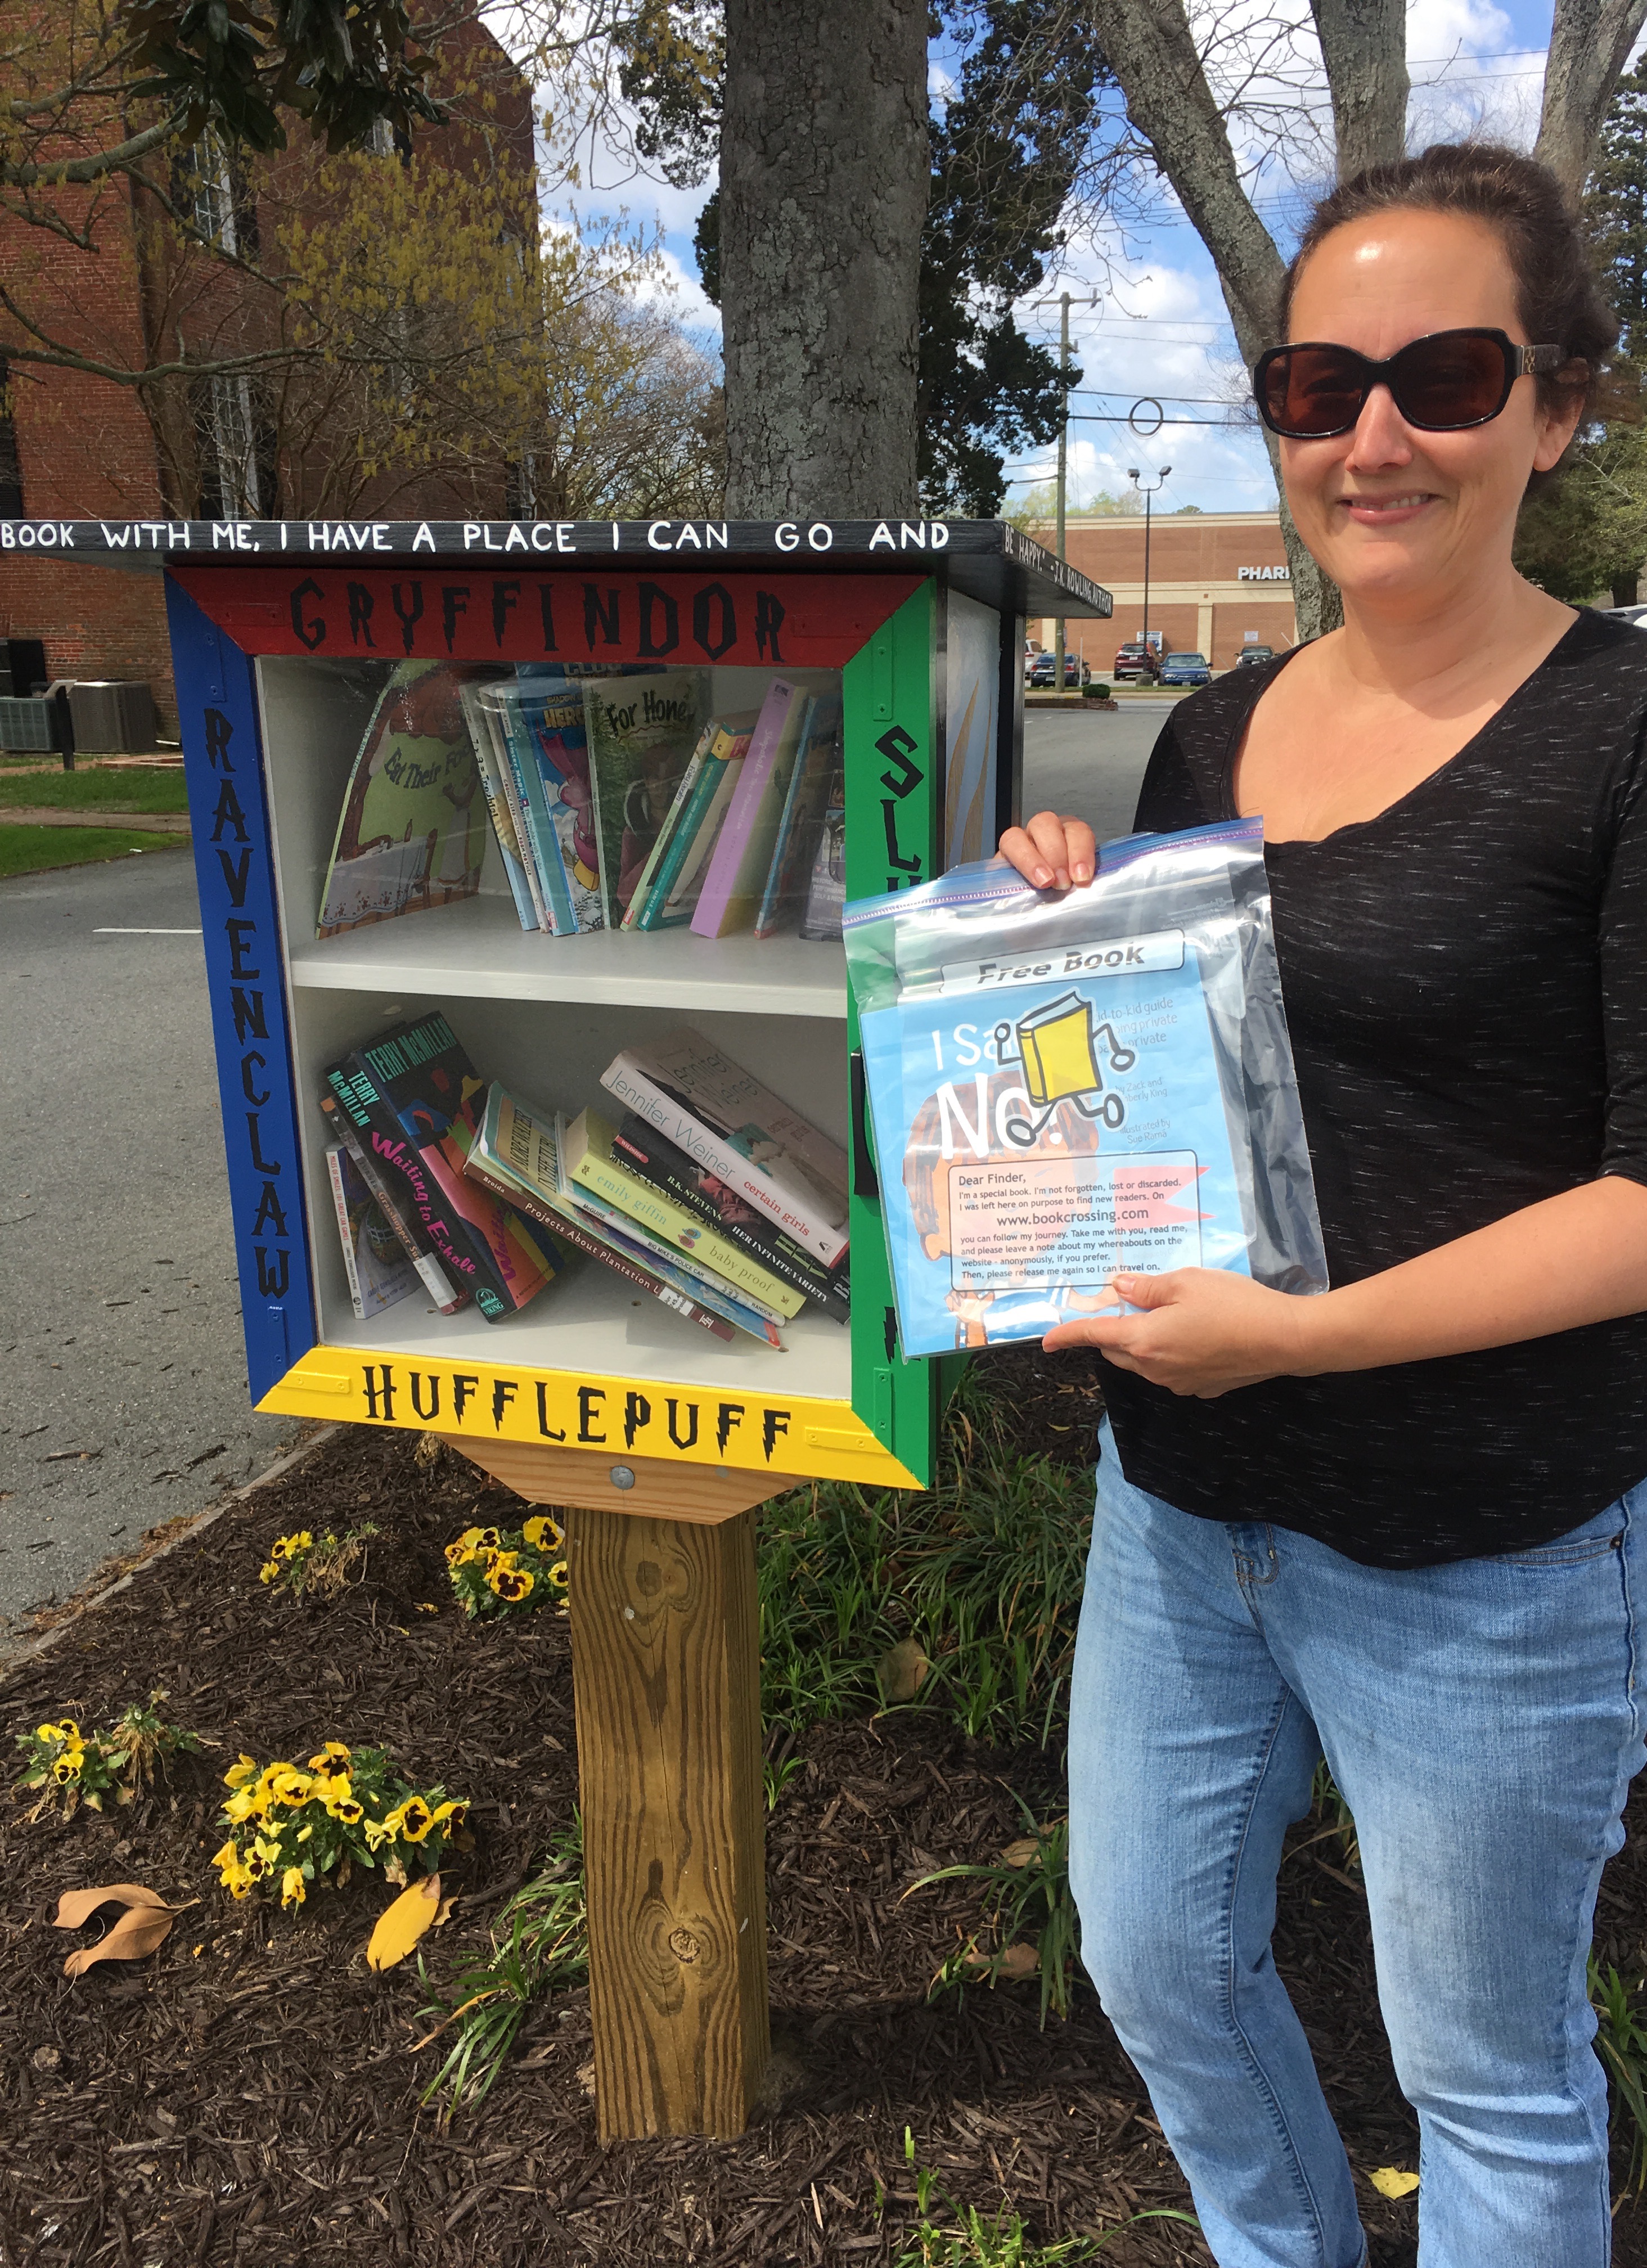 Always a good time to donate a book! Give one, take one.